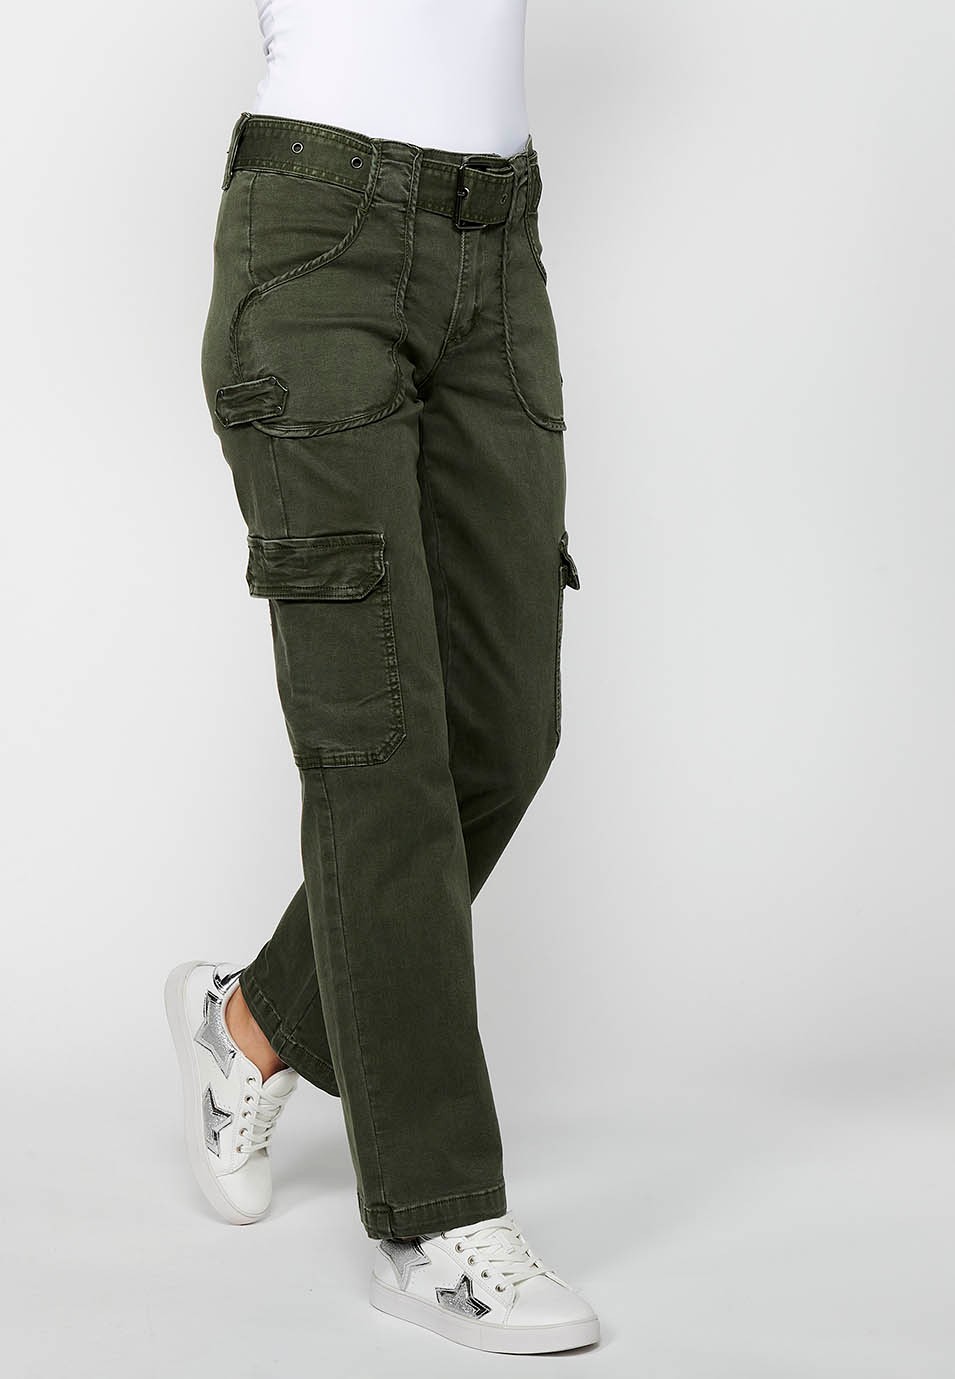 Long straight-cut pants with front zipper closure and button with patch pockets in Khaki Color for Women 3